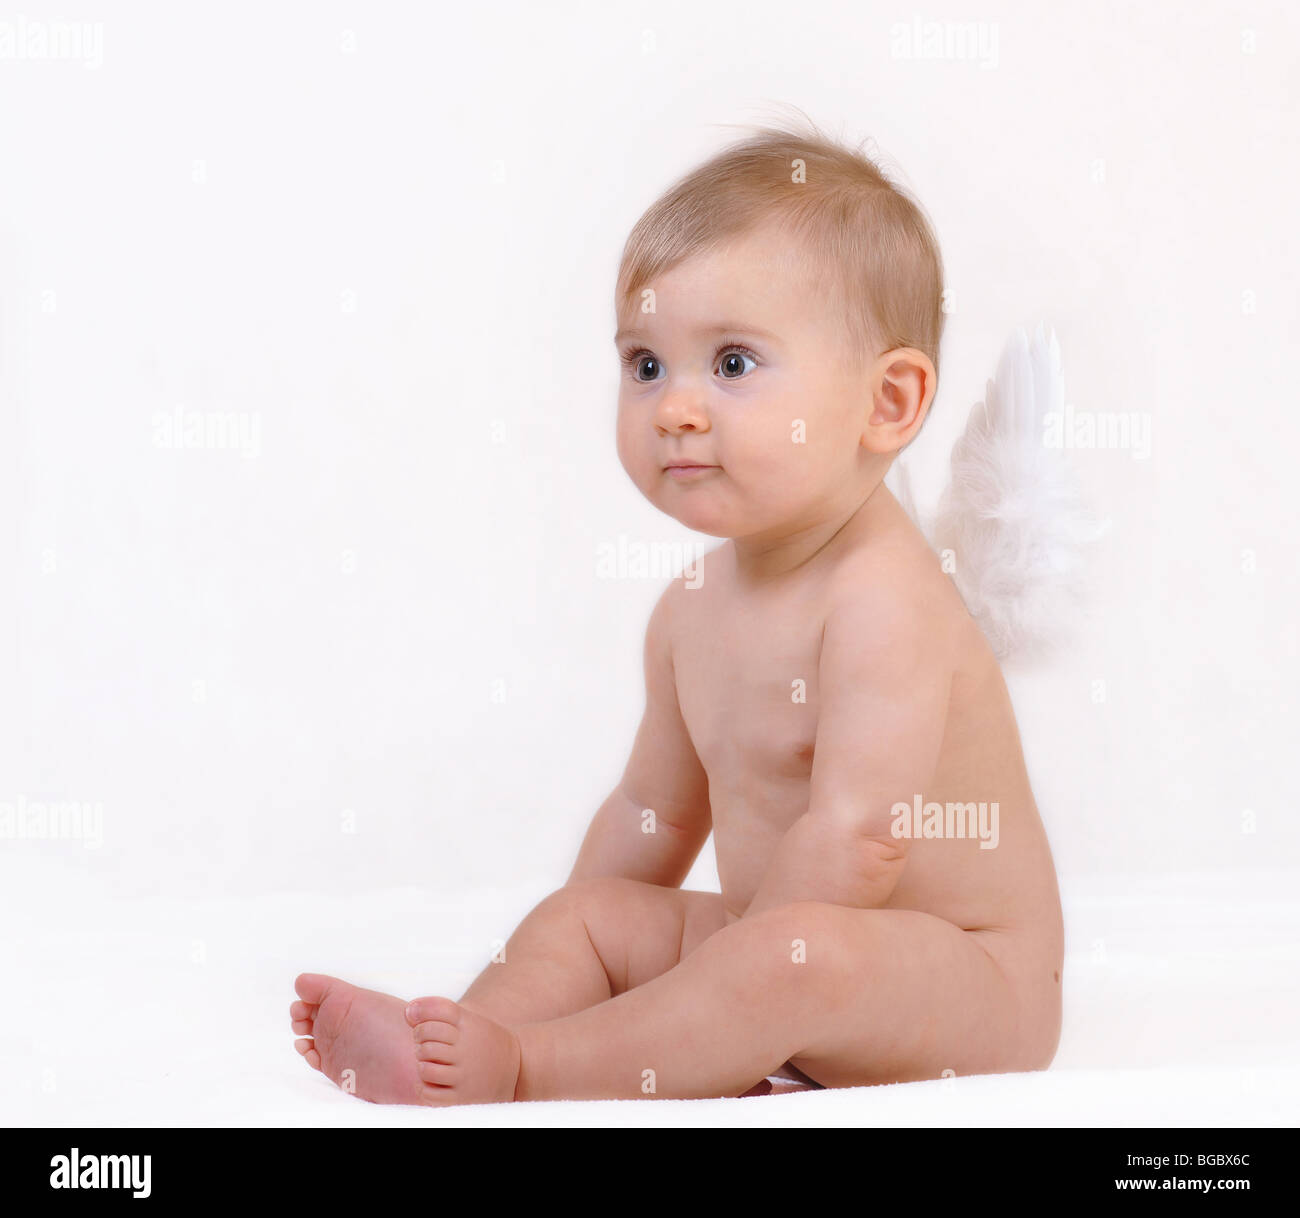 Little baby looks like angel on the white background Stock Photo